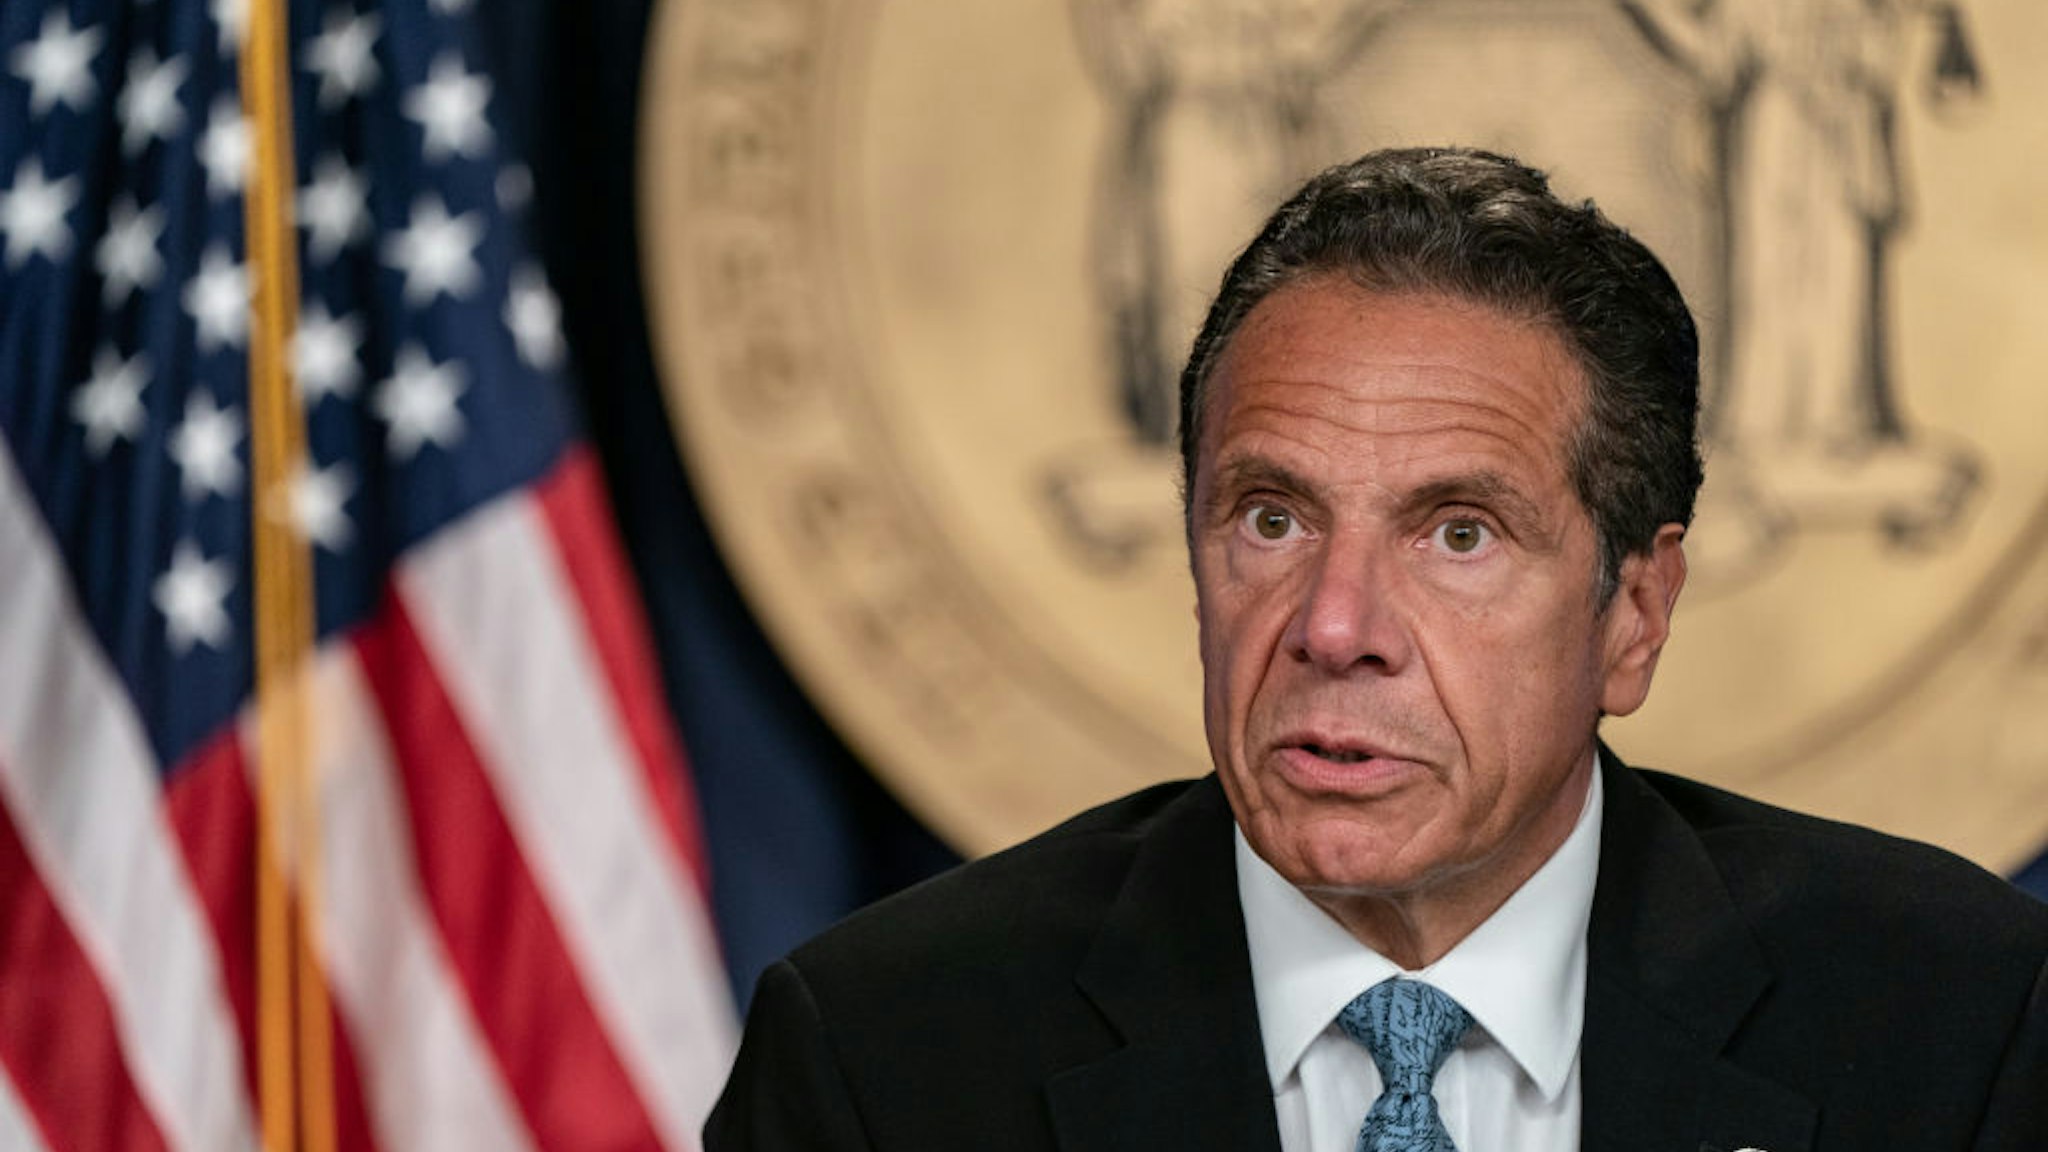 New York Gov. Andrew Cuomo speaks during the daily media briefing at the Office of the Governor of the State of New York on July 23, 2020 in New York City.